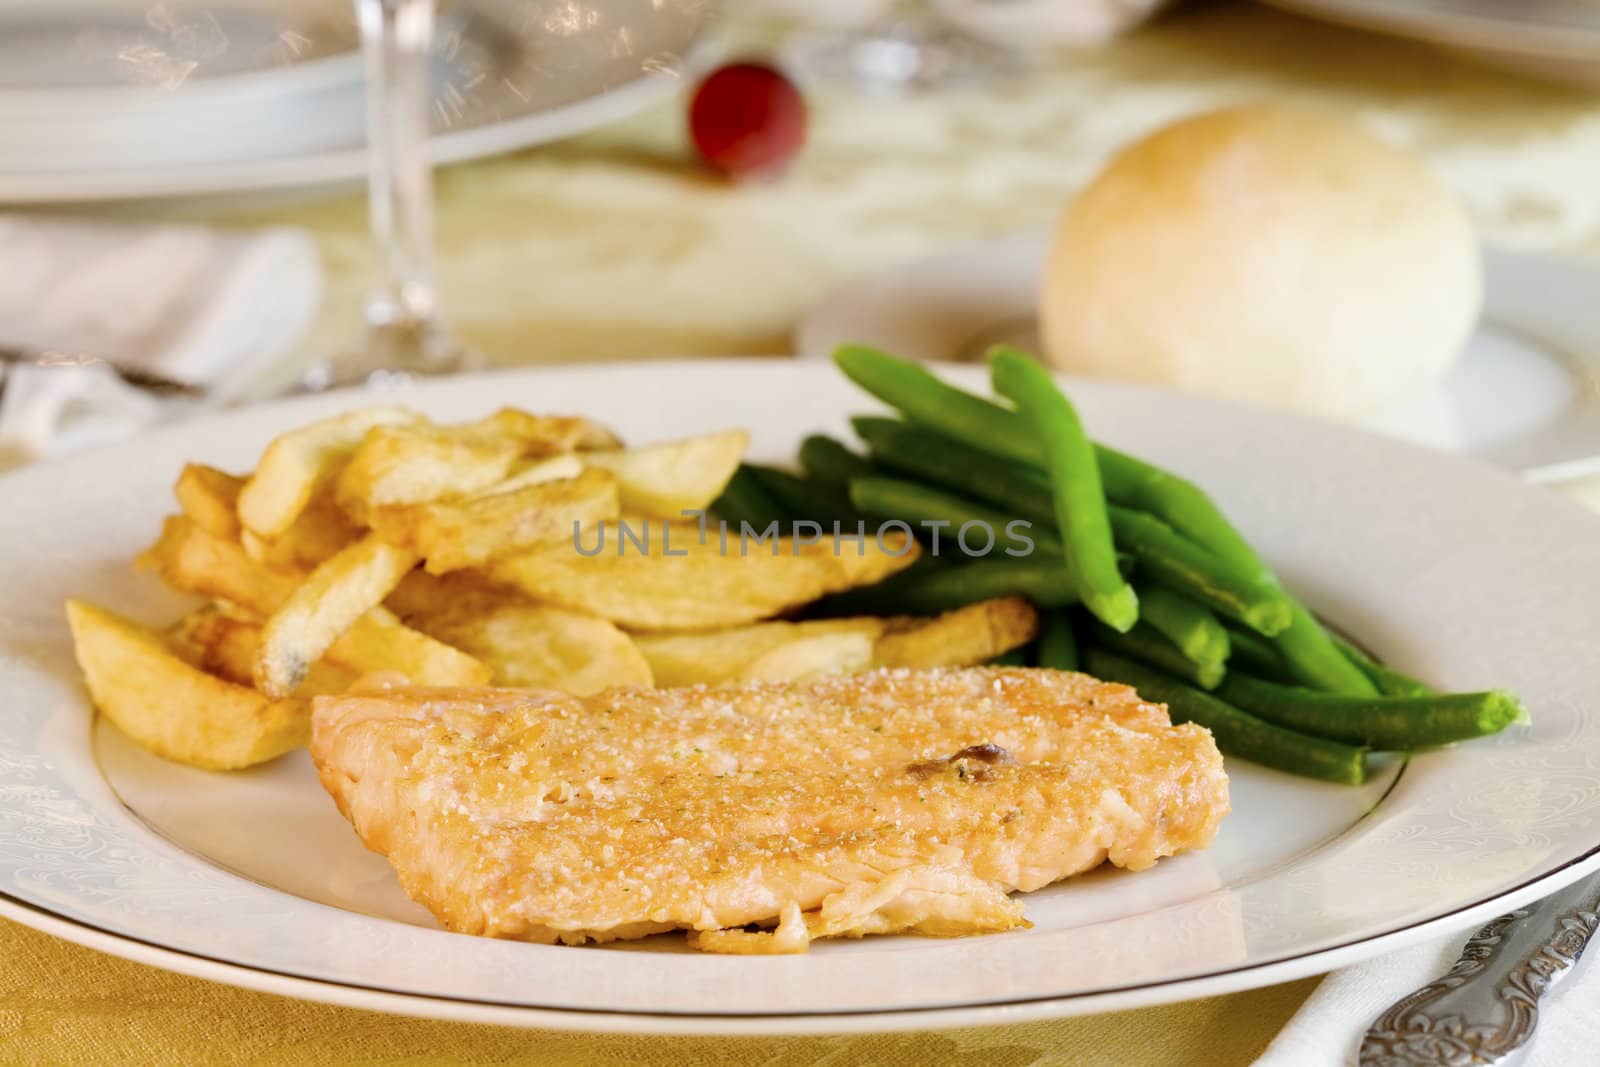 Plate of delicious fried salmon on table by jarenwicklund